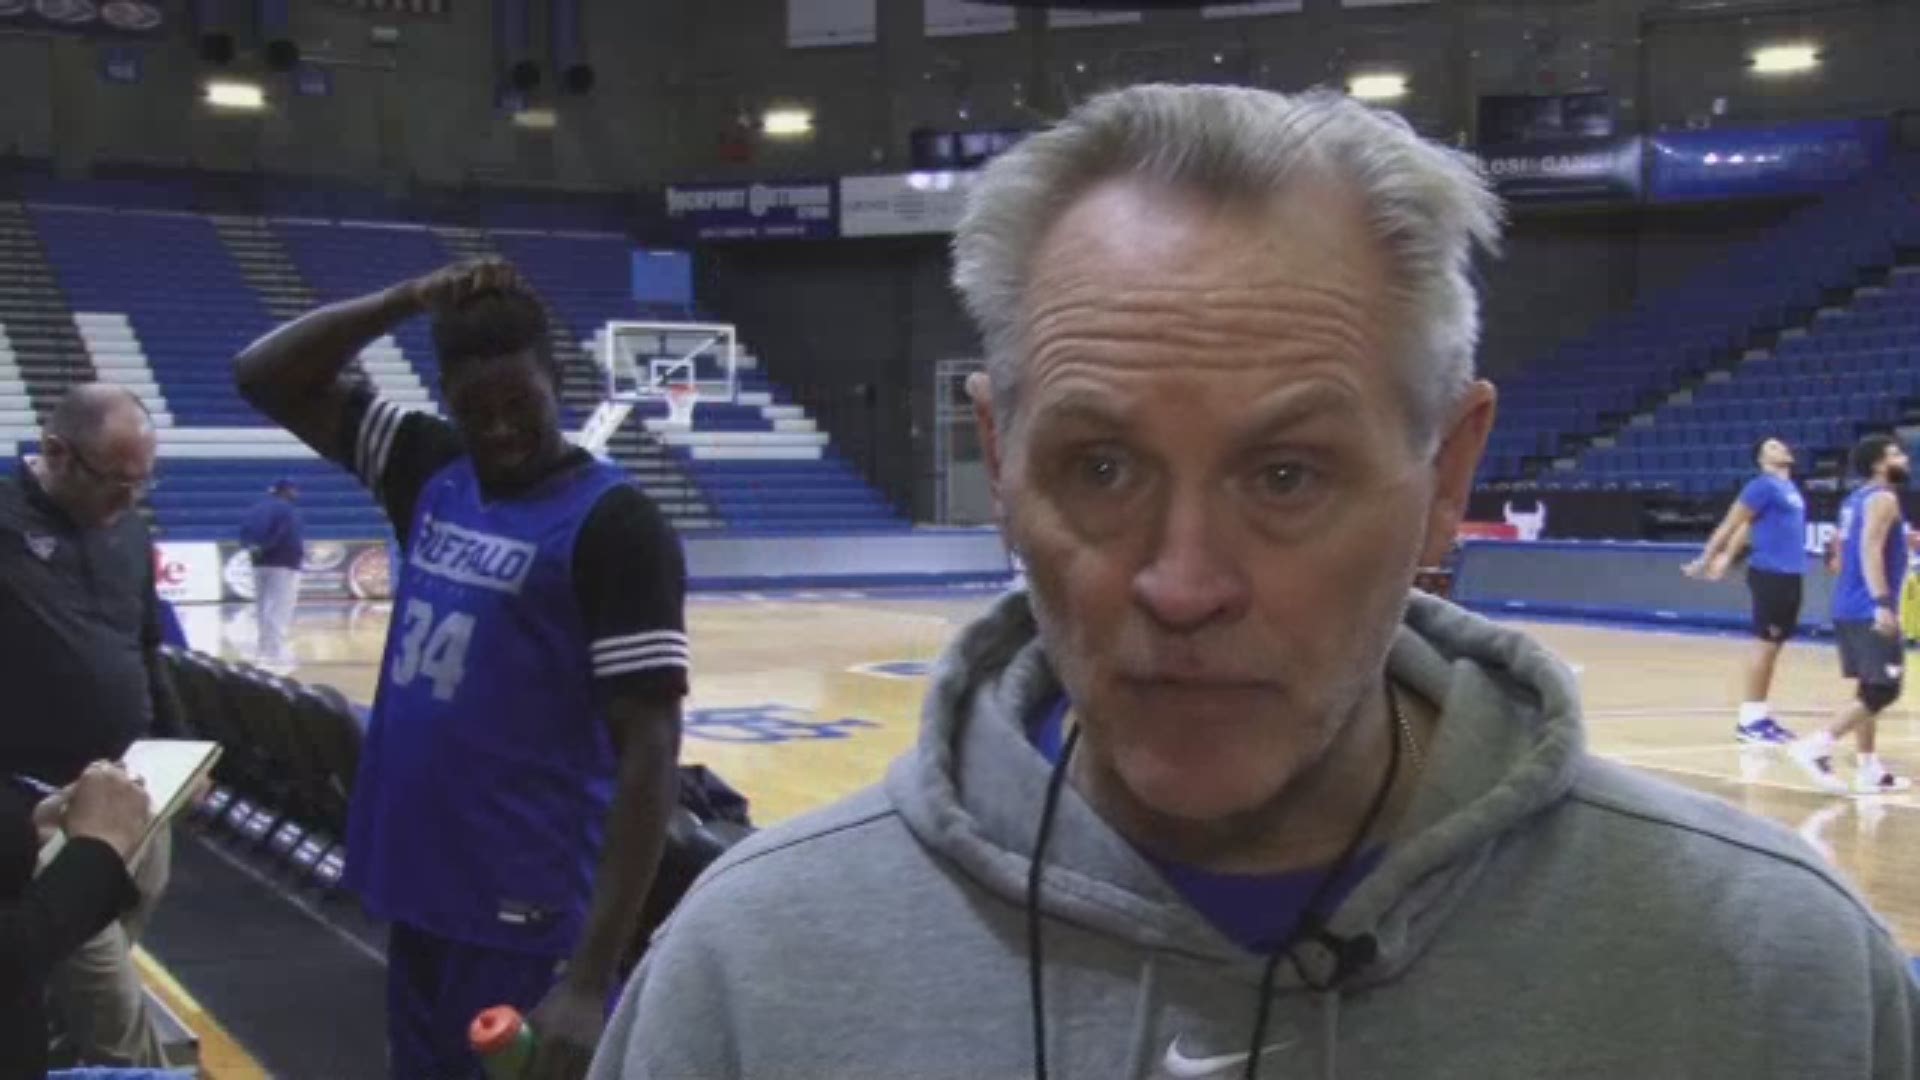 UB's Jim Whitesell has 399 career wins as a head coach as he leads the Bulls into action against Western Michigan Tuesday night at Alumni Arena.